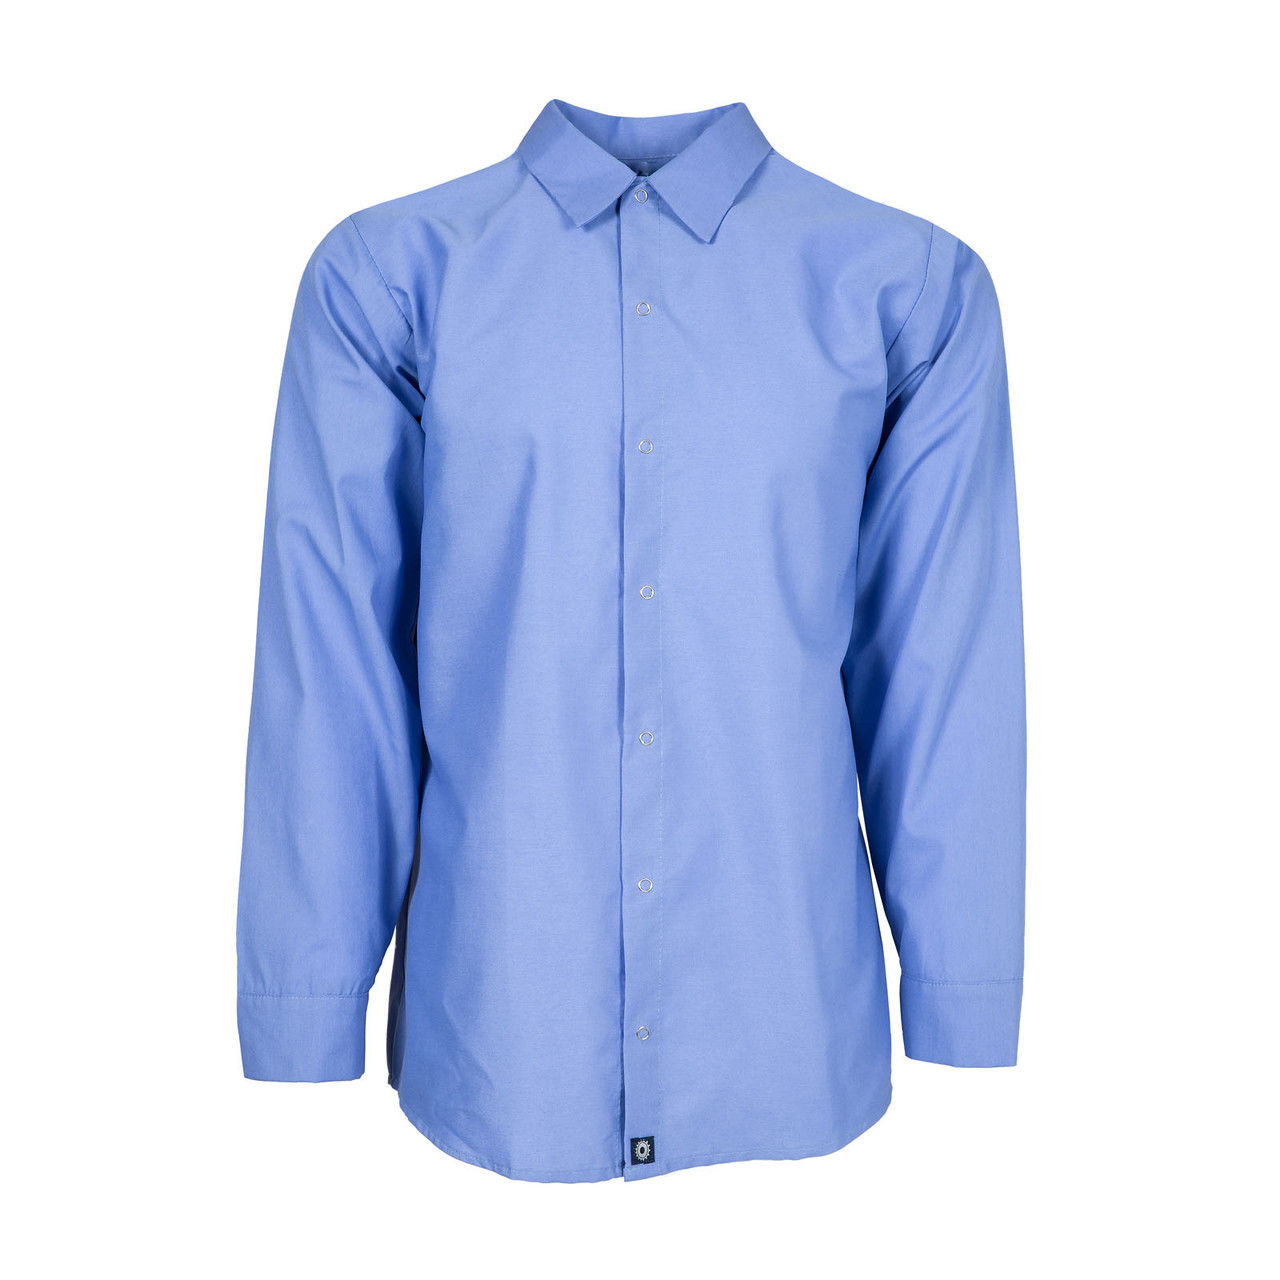 What are the features of this blue work shirt womens, specifically the Gulf Blue Long Sleeve?